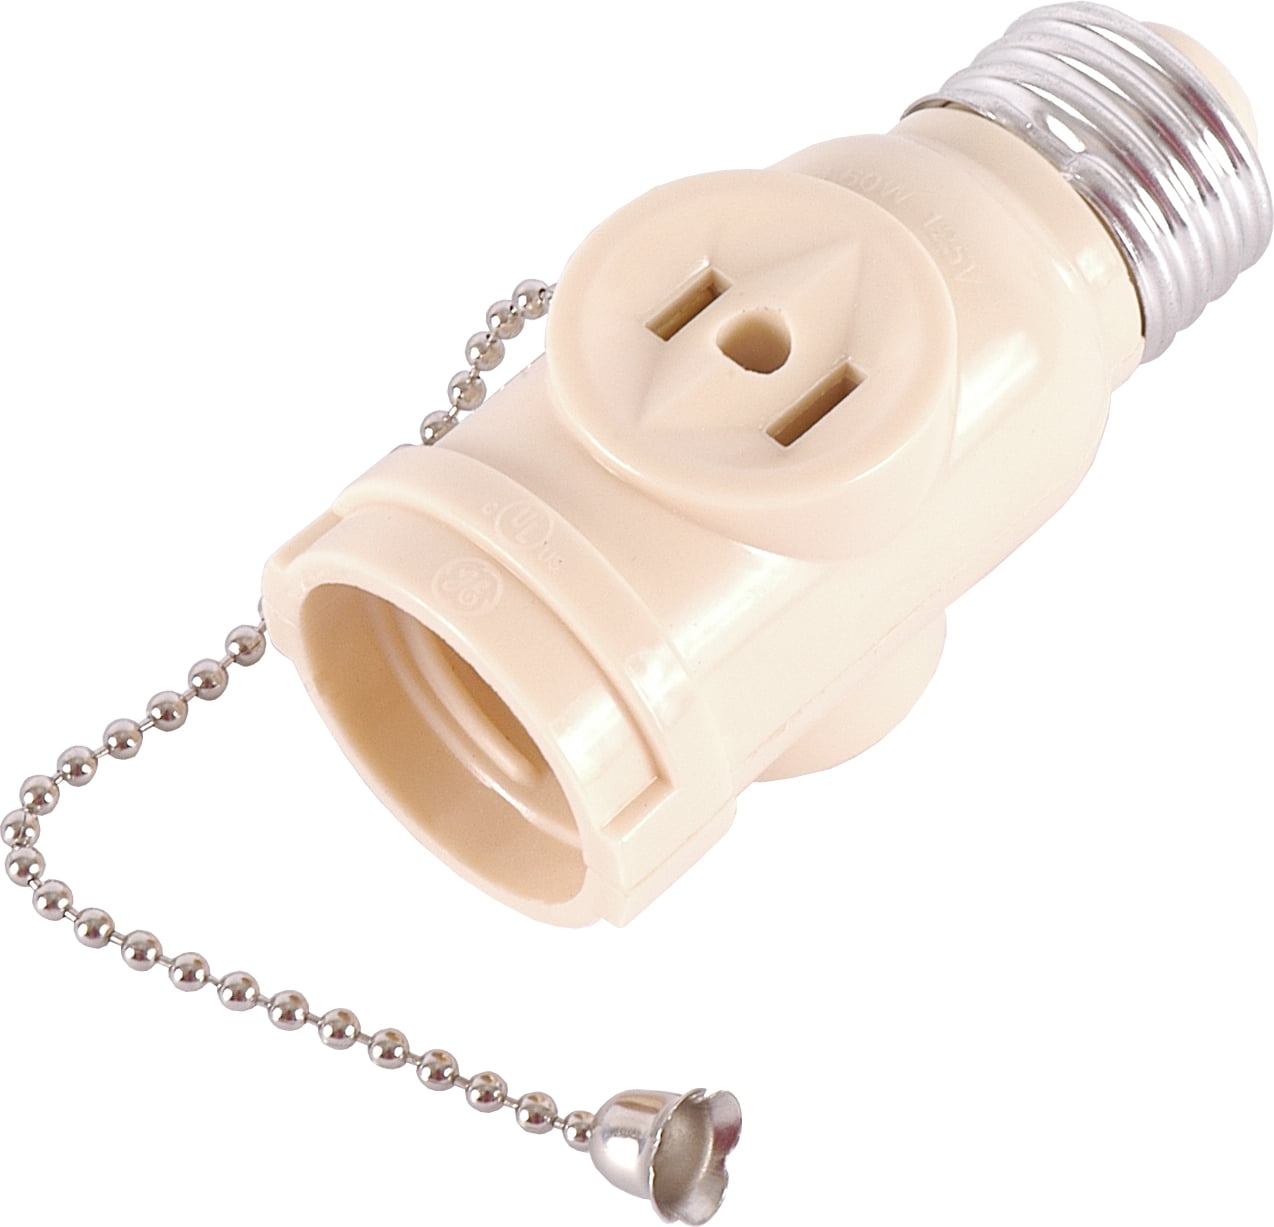 Light Socket Adapter Pull Chain Control Bulb Switched Socket 2 Outlet GE 